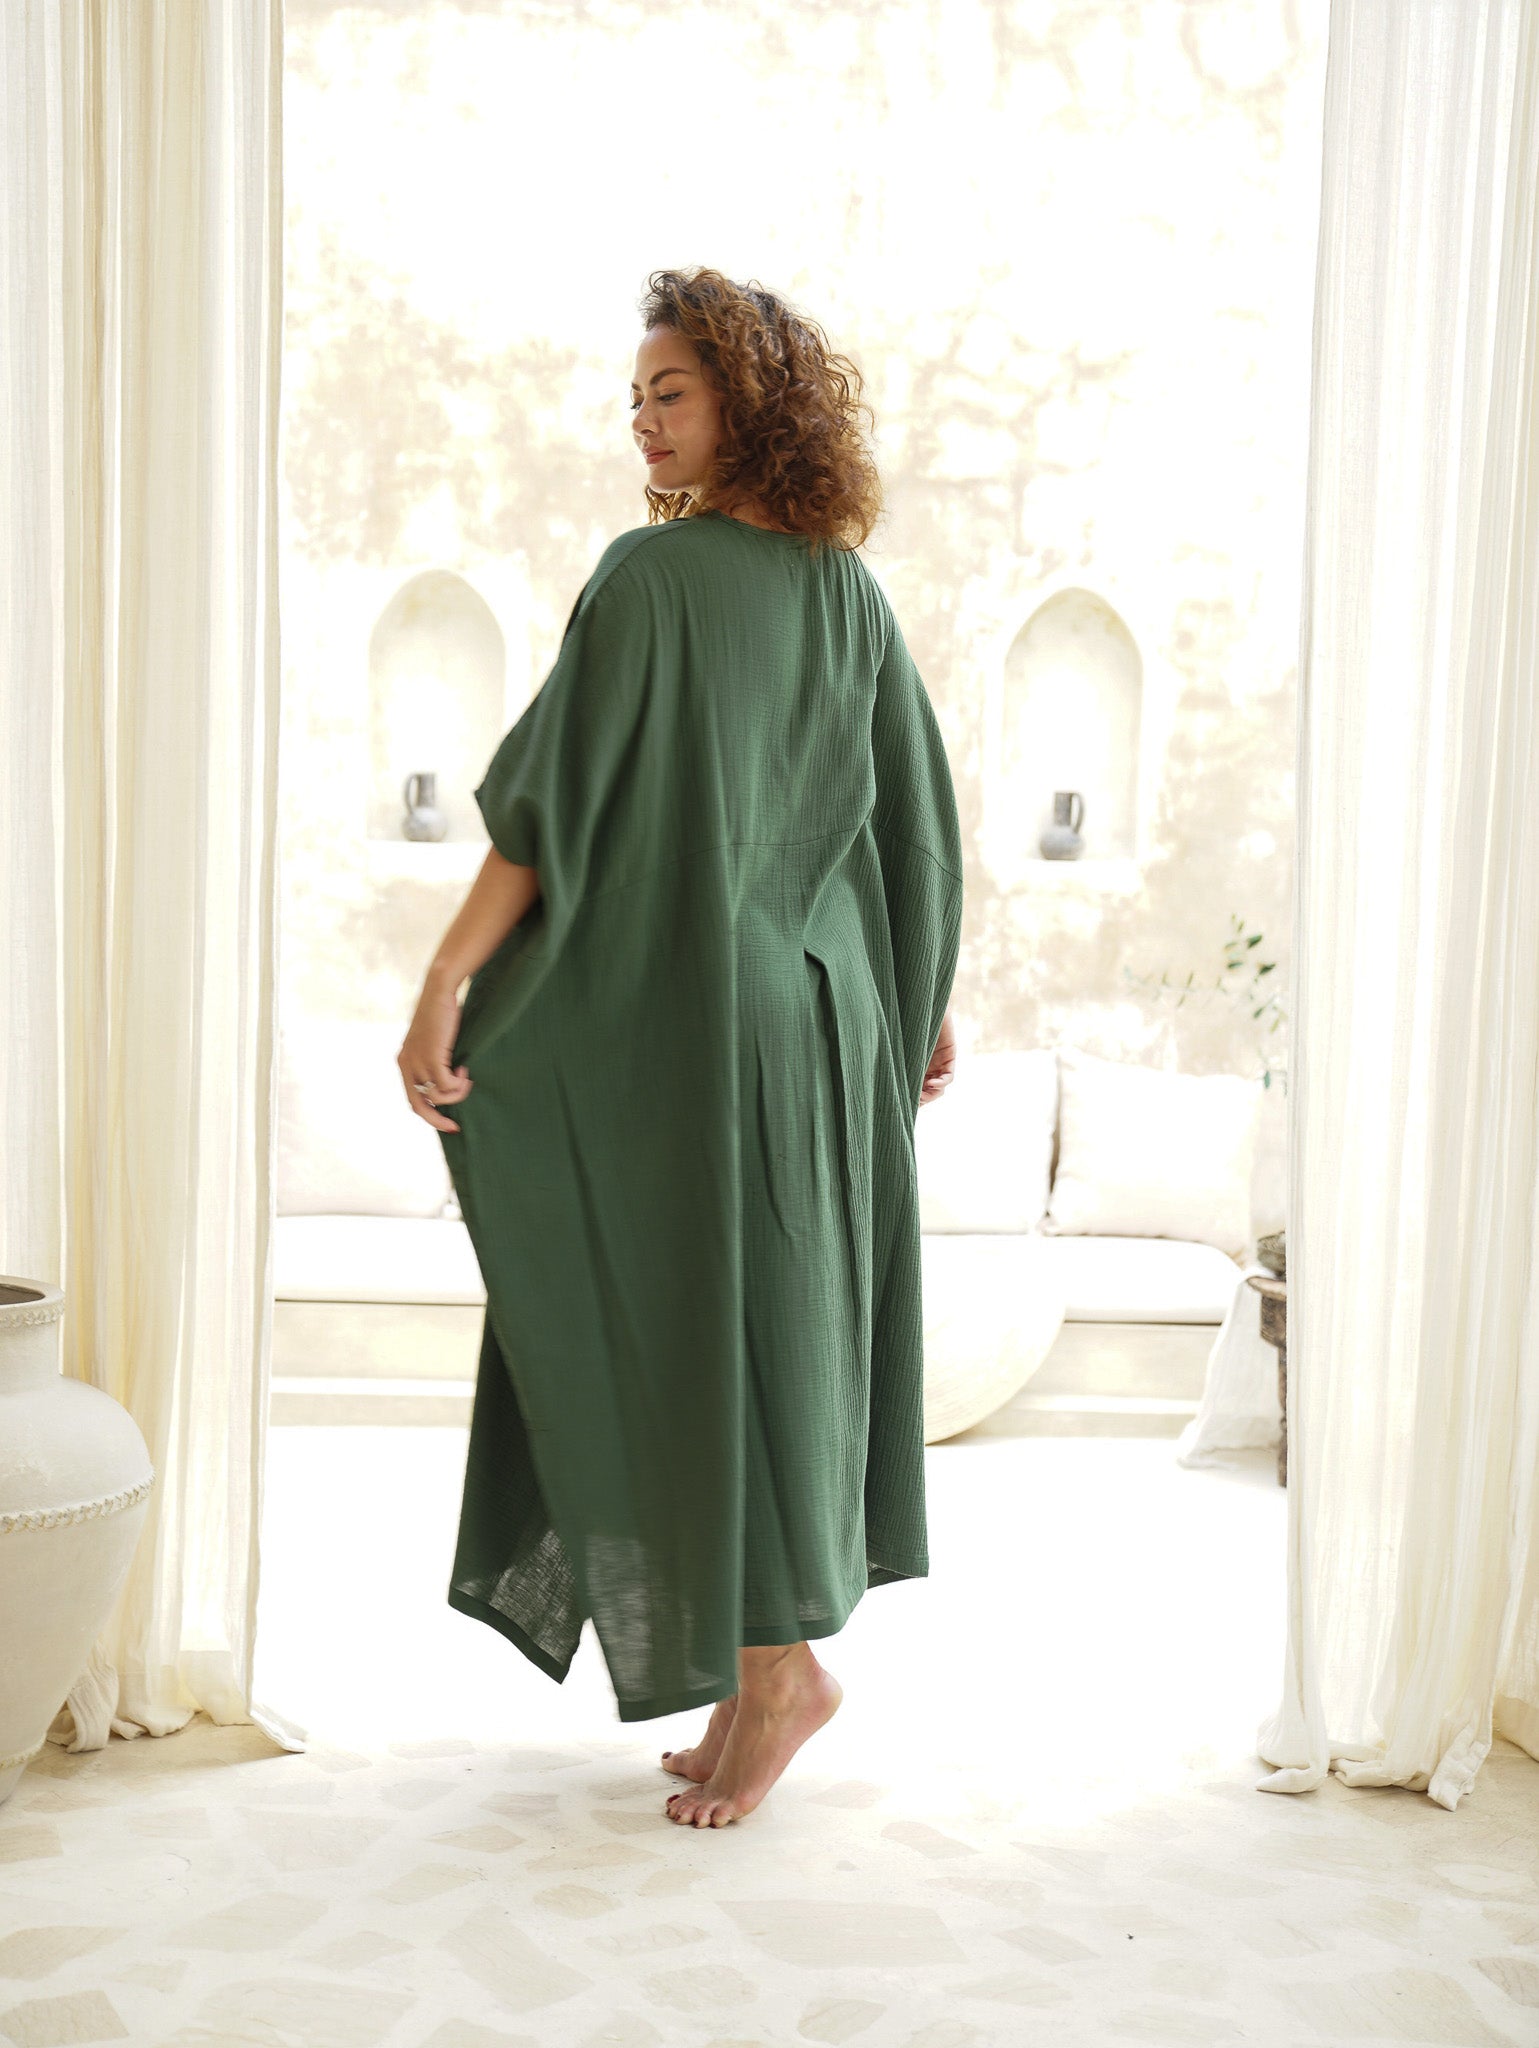 Step into sophistication with our Forest Green Cotton Gauze Long Kaftan. Effortless style, unmatched comfort. Buy now!